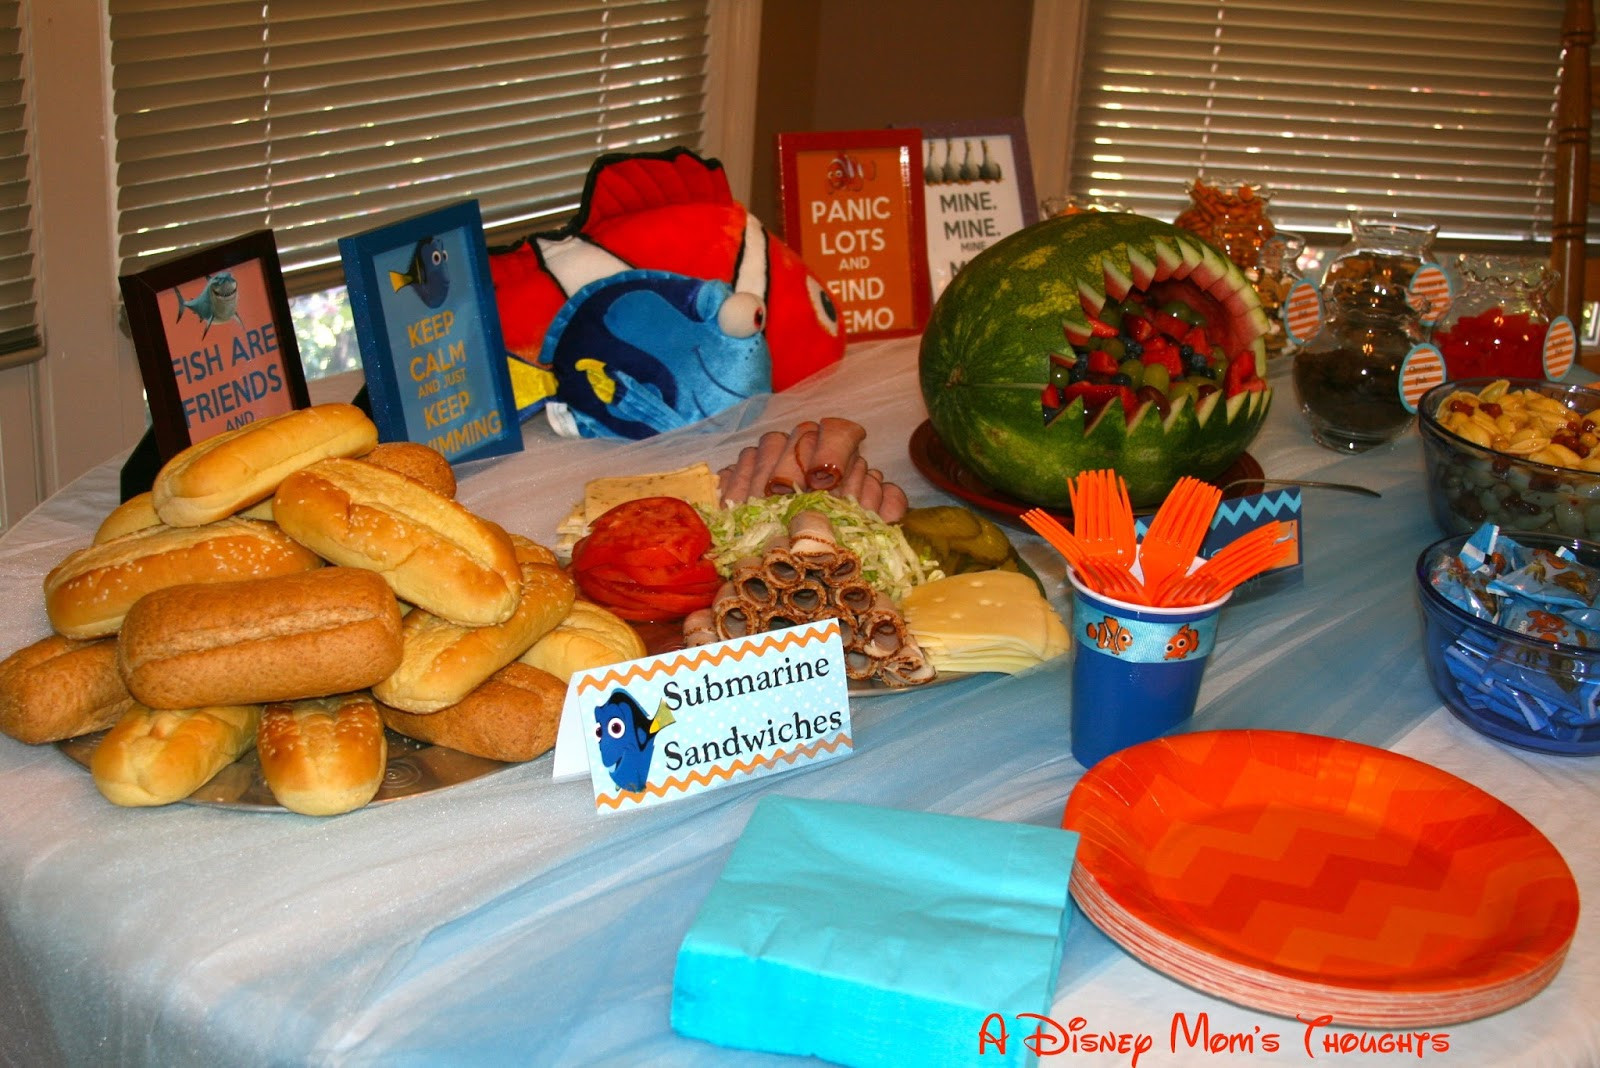 Finding Nemo Party Food Ideas
 Finding Nemo on Pinterest